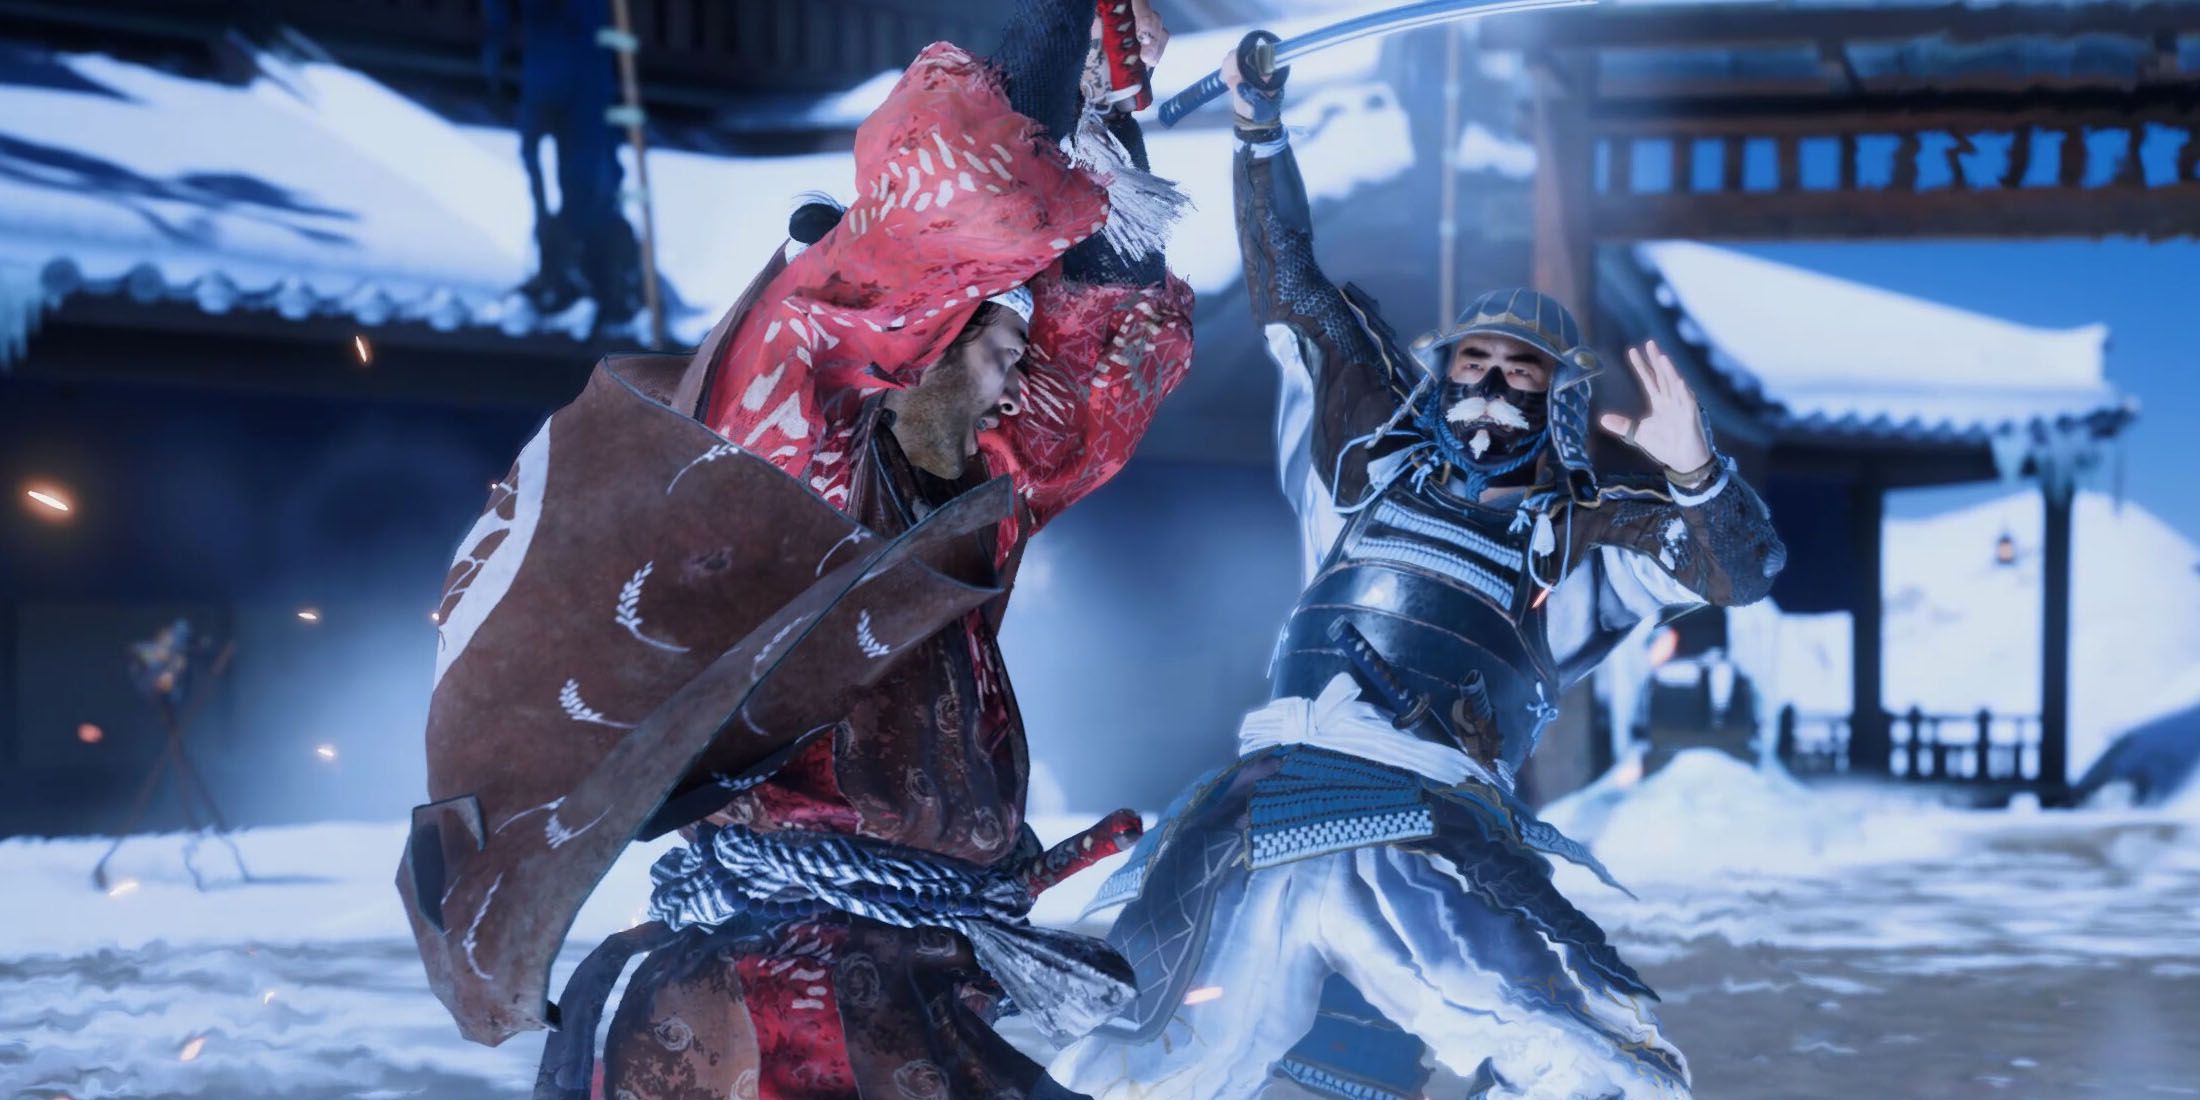 A screenshot of an armor-clad Jin Sakai battling an enemy in a snow-covered temple in Ghost of Tsushima.